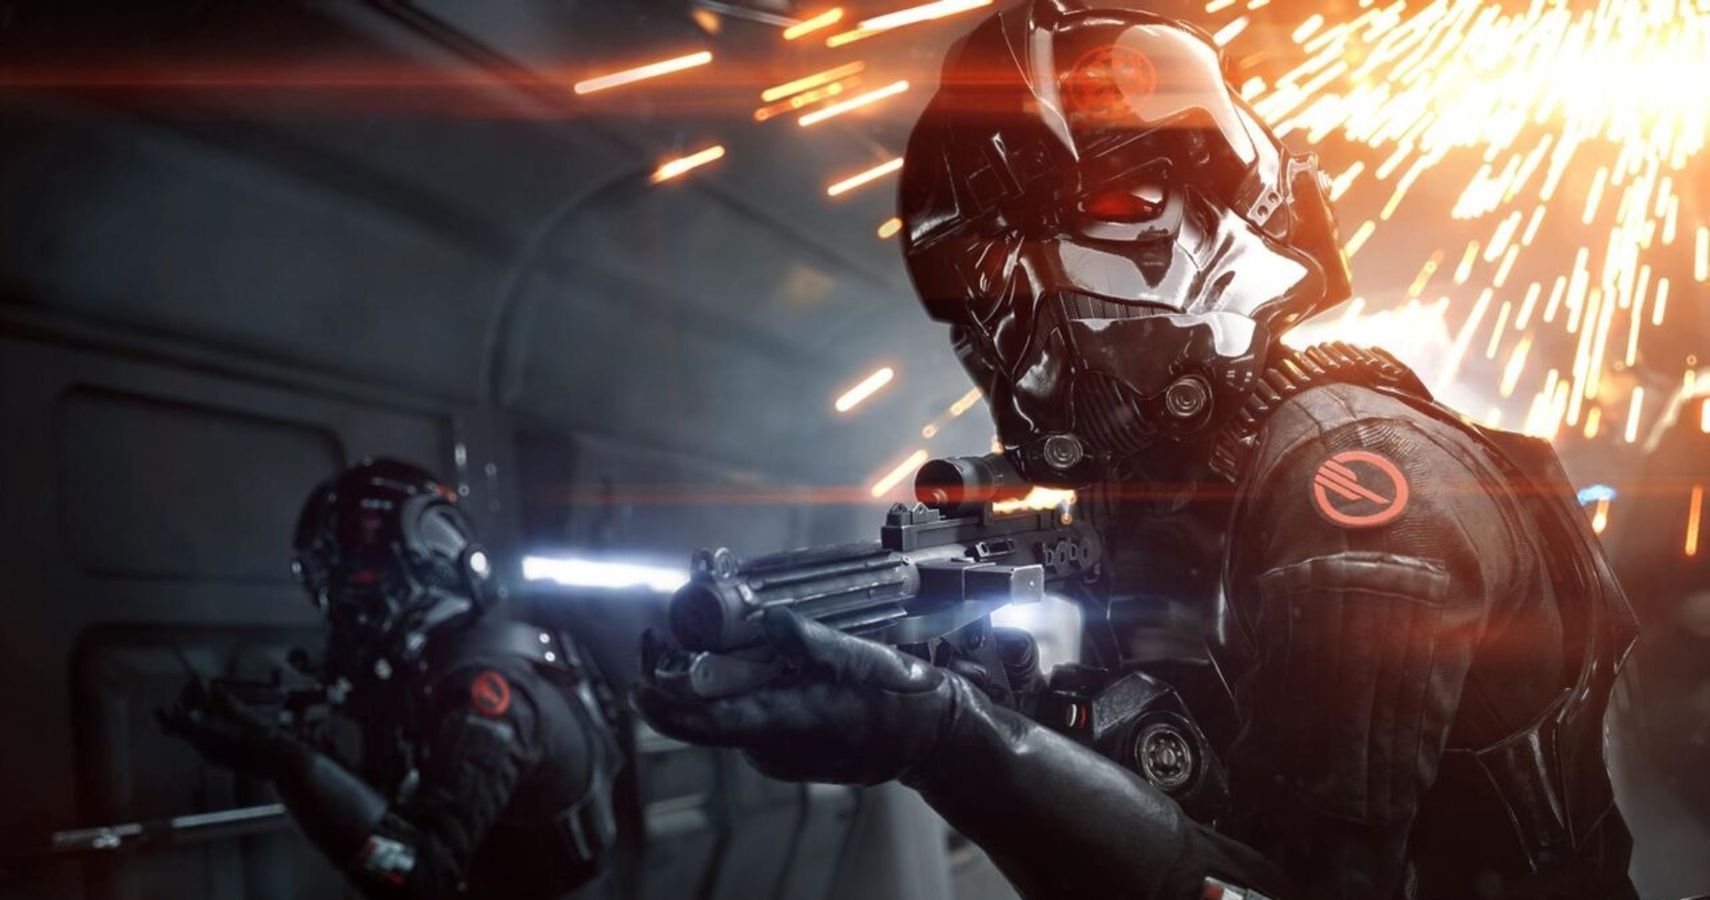 Star Wars Battlefront II Celebration Edition is the next free EPIC GAMES  STORE title (Jan 14 - Jan 21) News